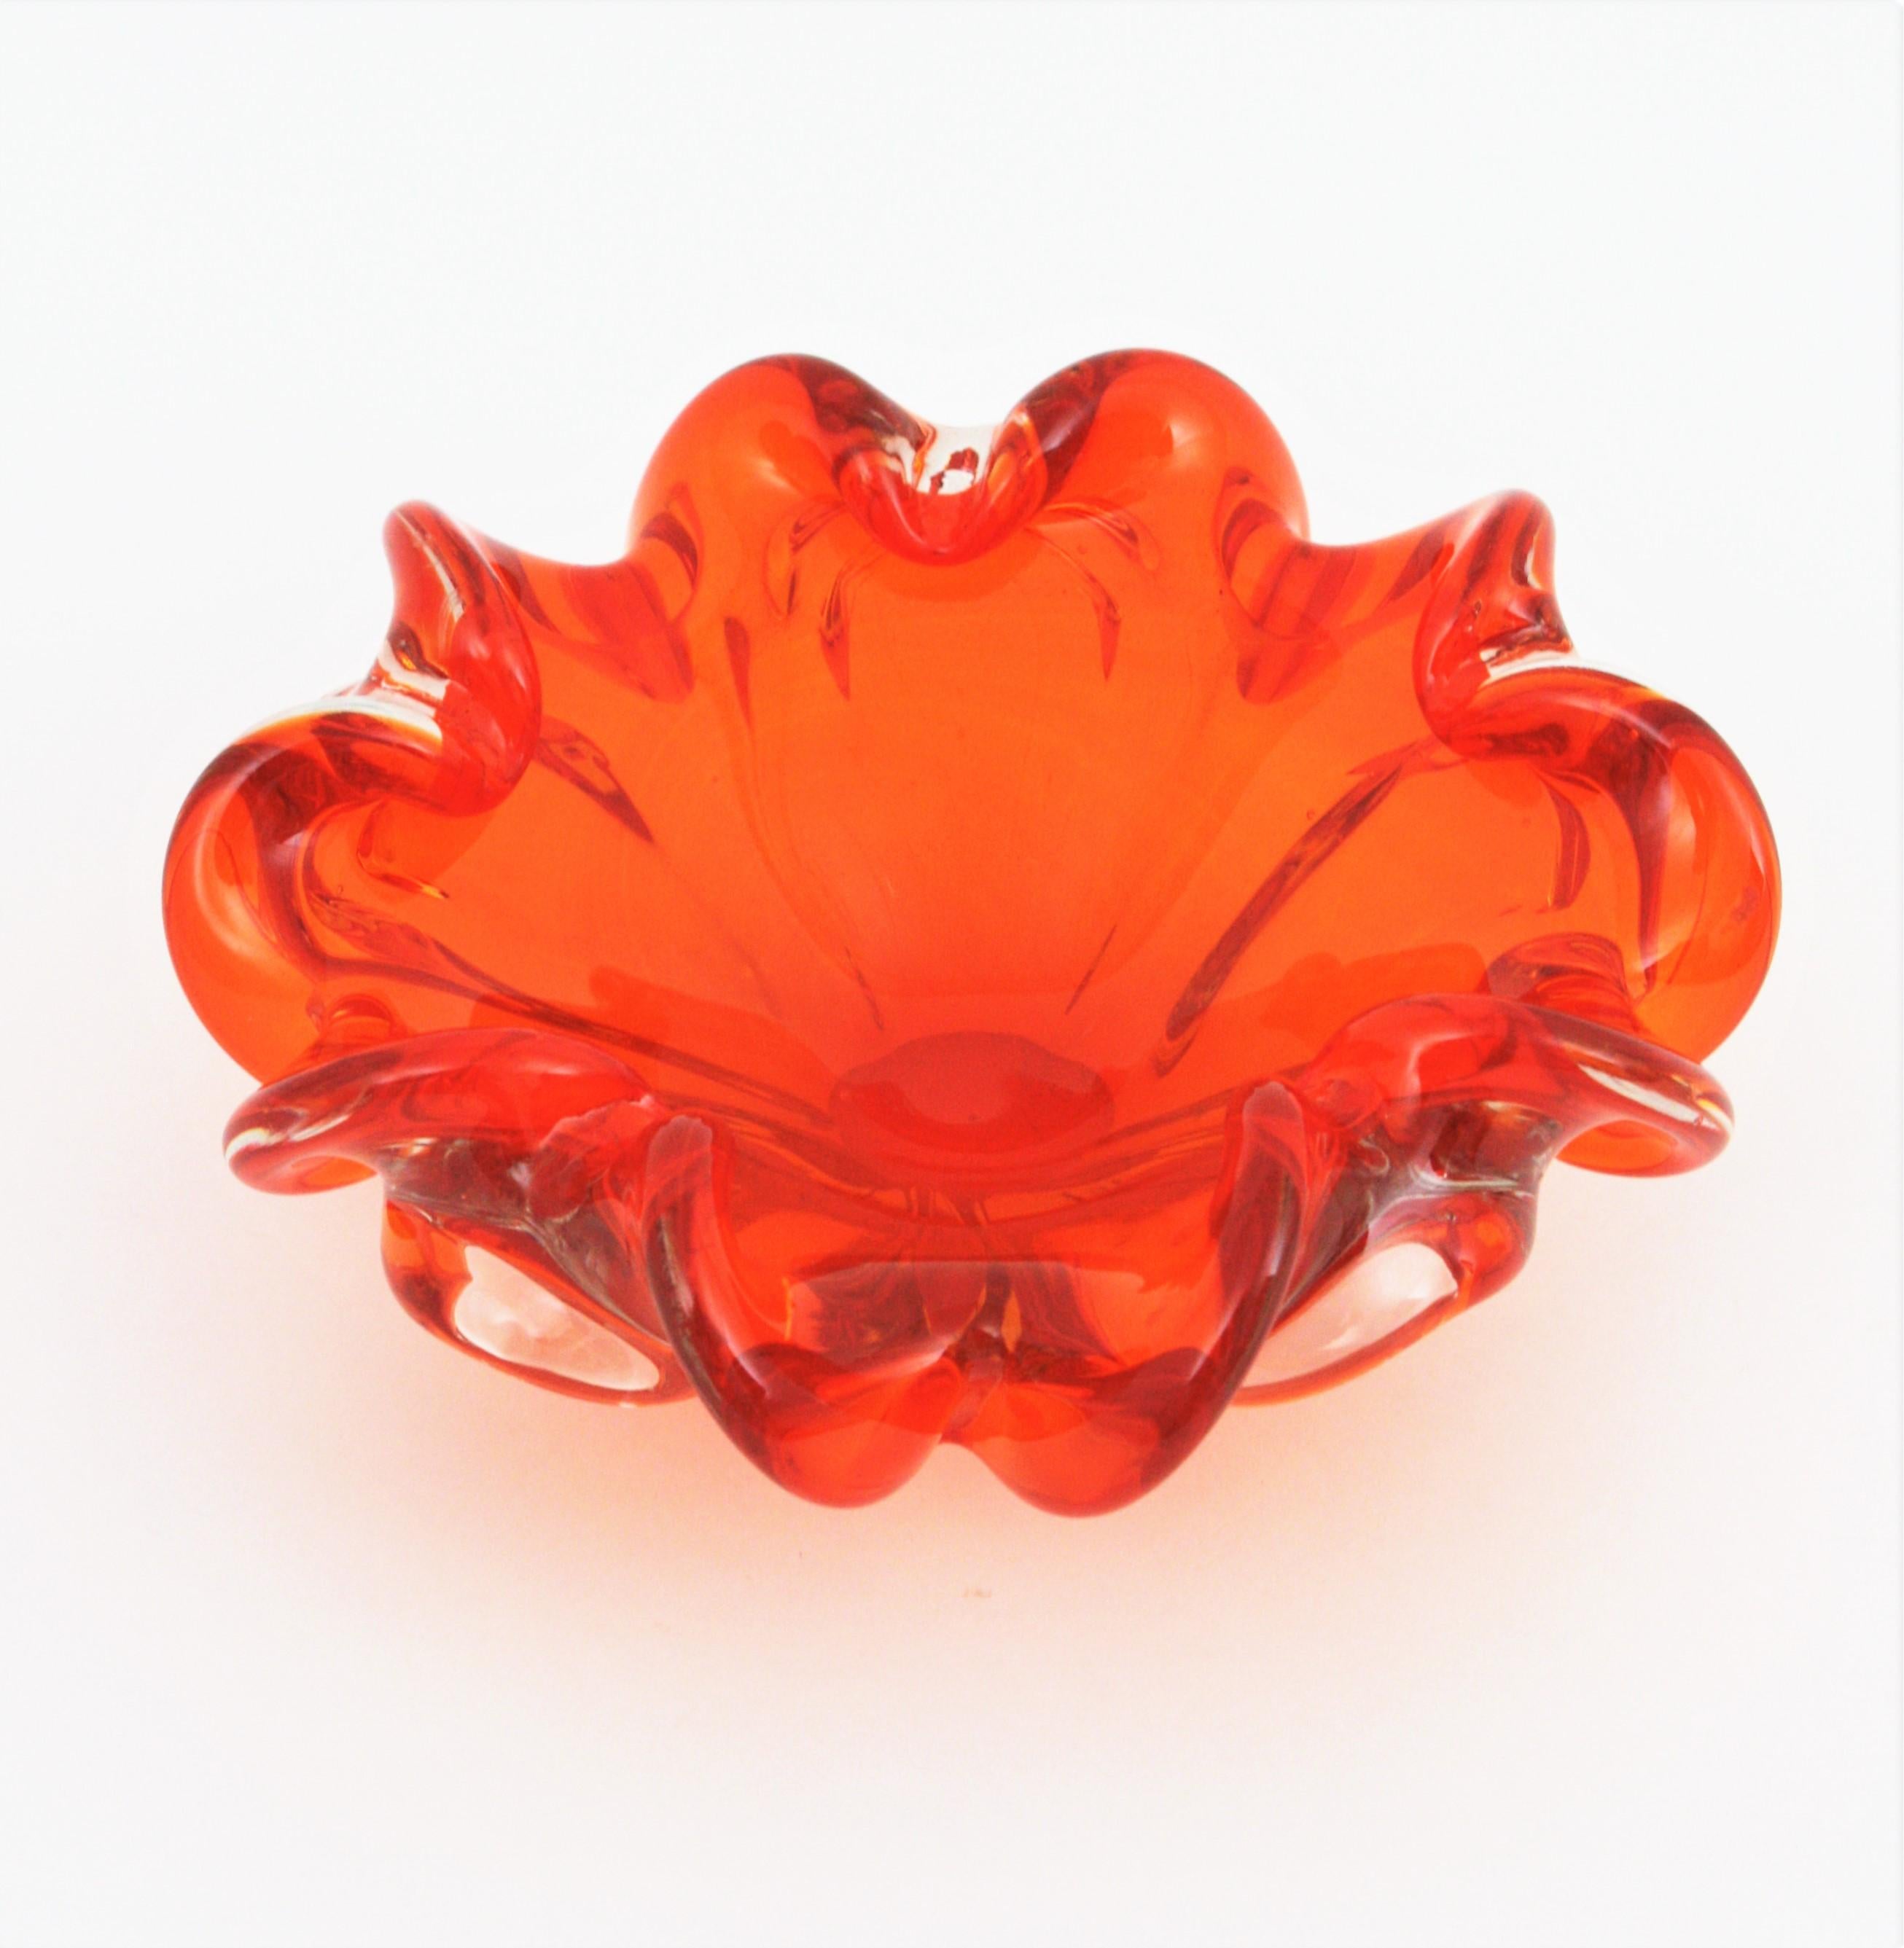 Midcentury Italian Murano Sommerso Orange and Clear Art Glass Bowl / Ashtray For Sale 4